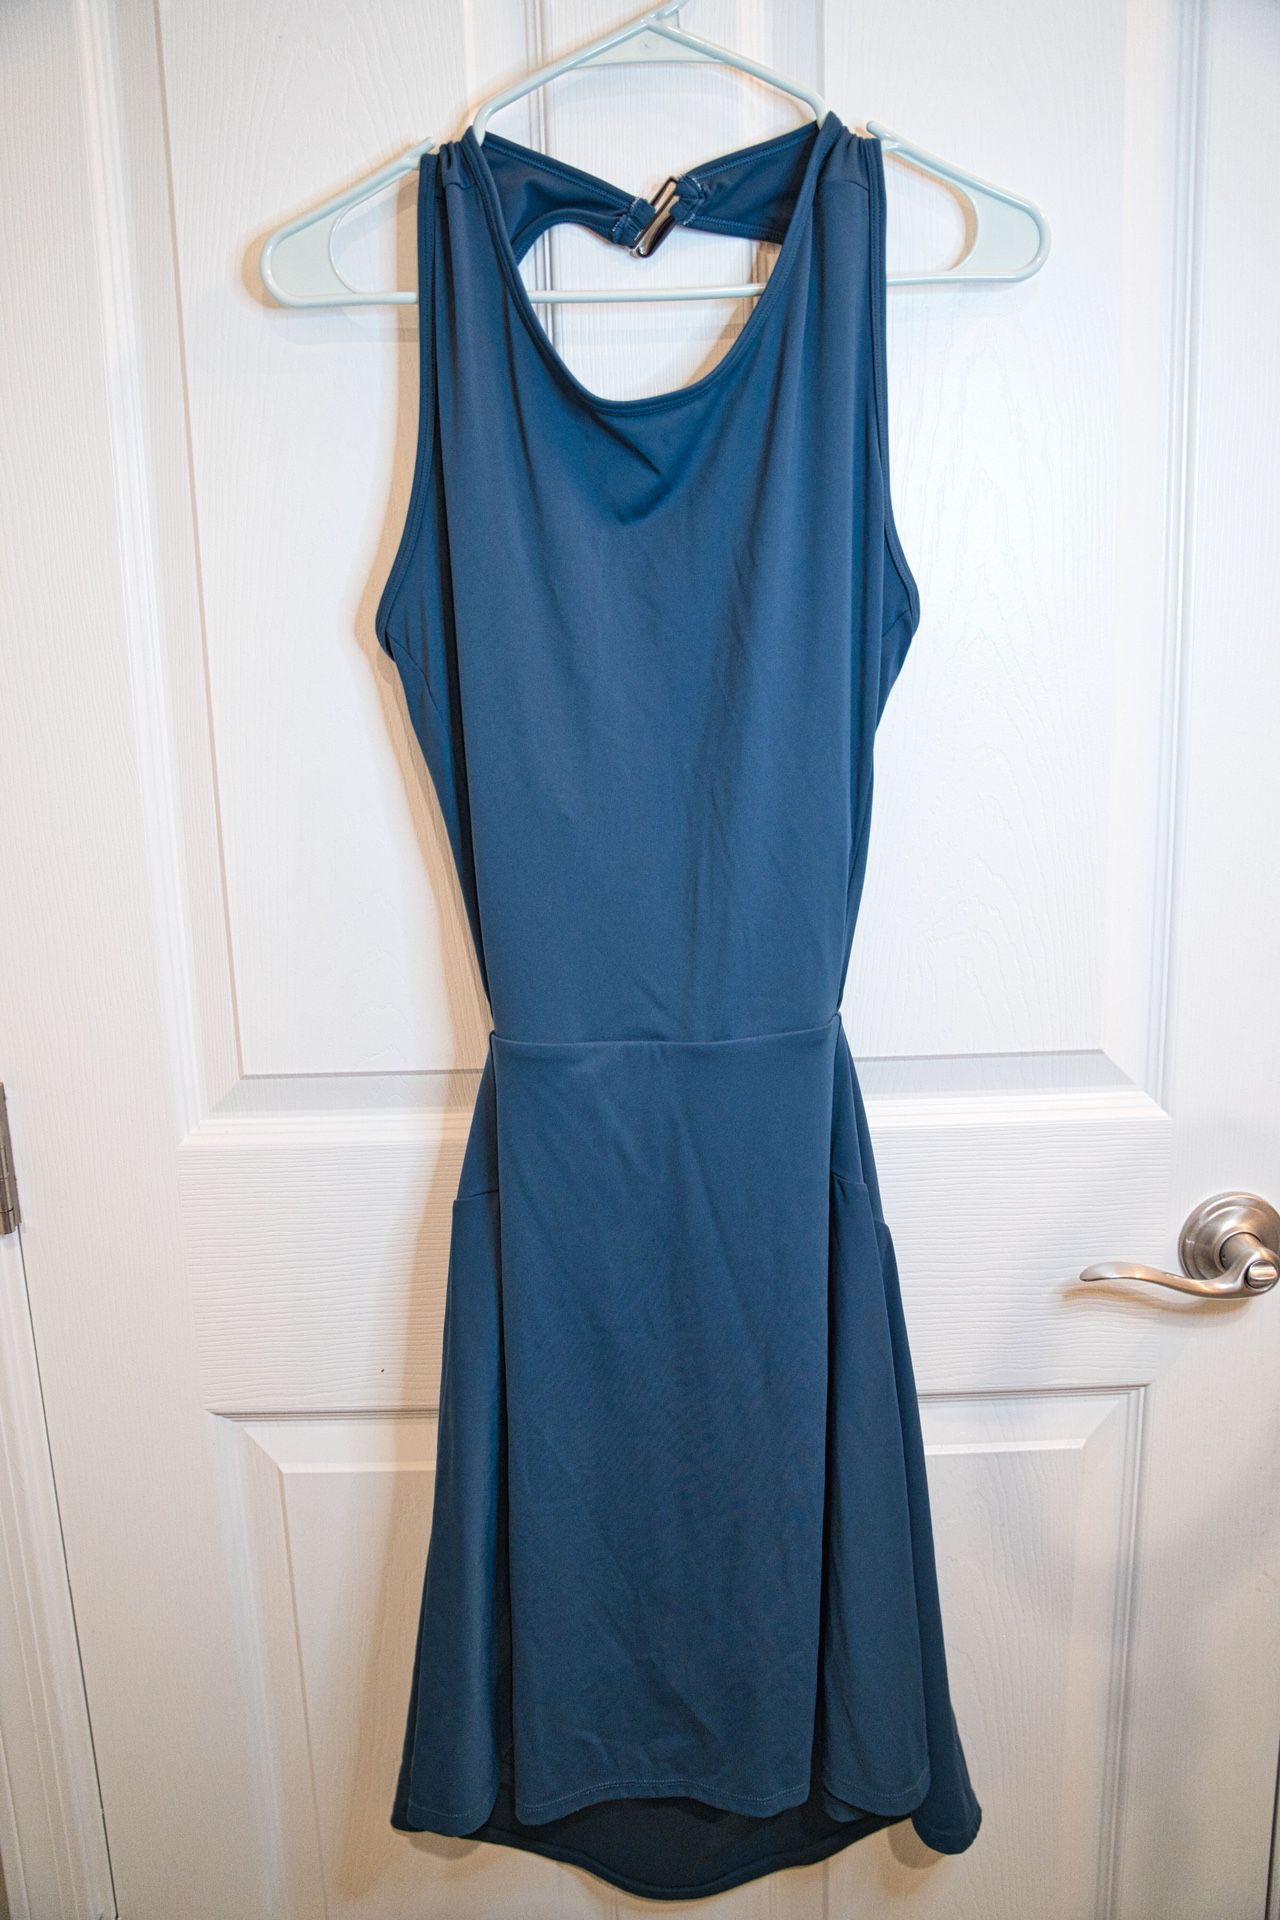 Blue Workout Dress With Spandex